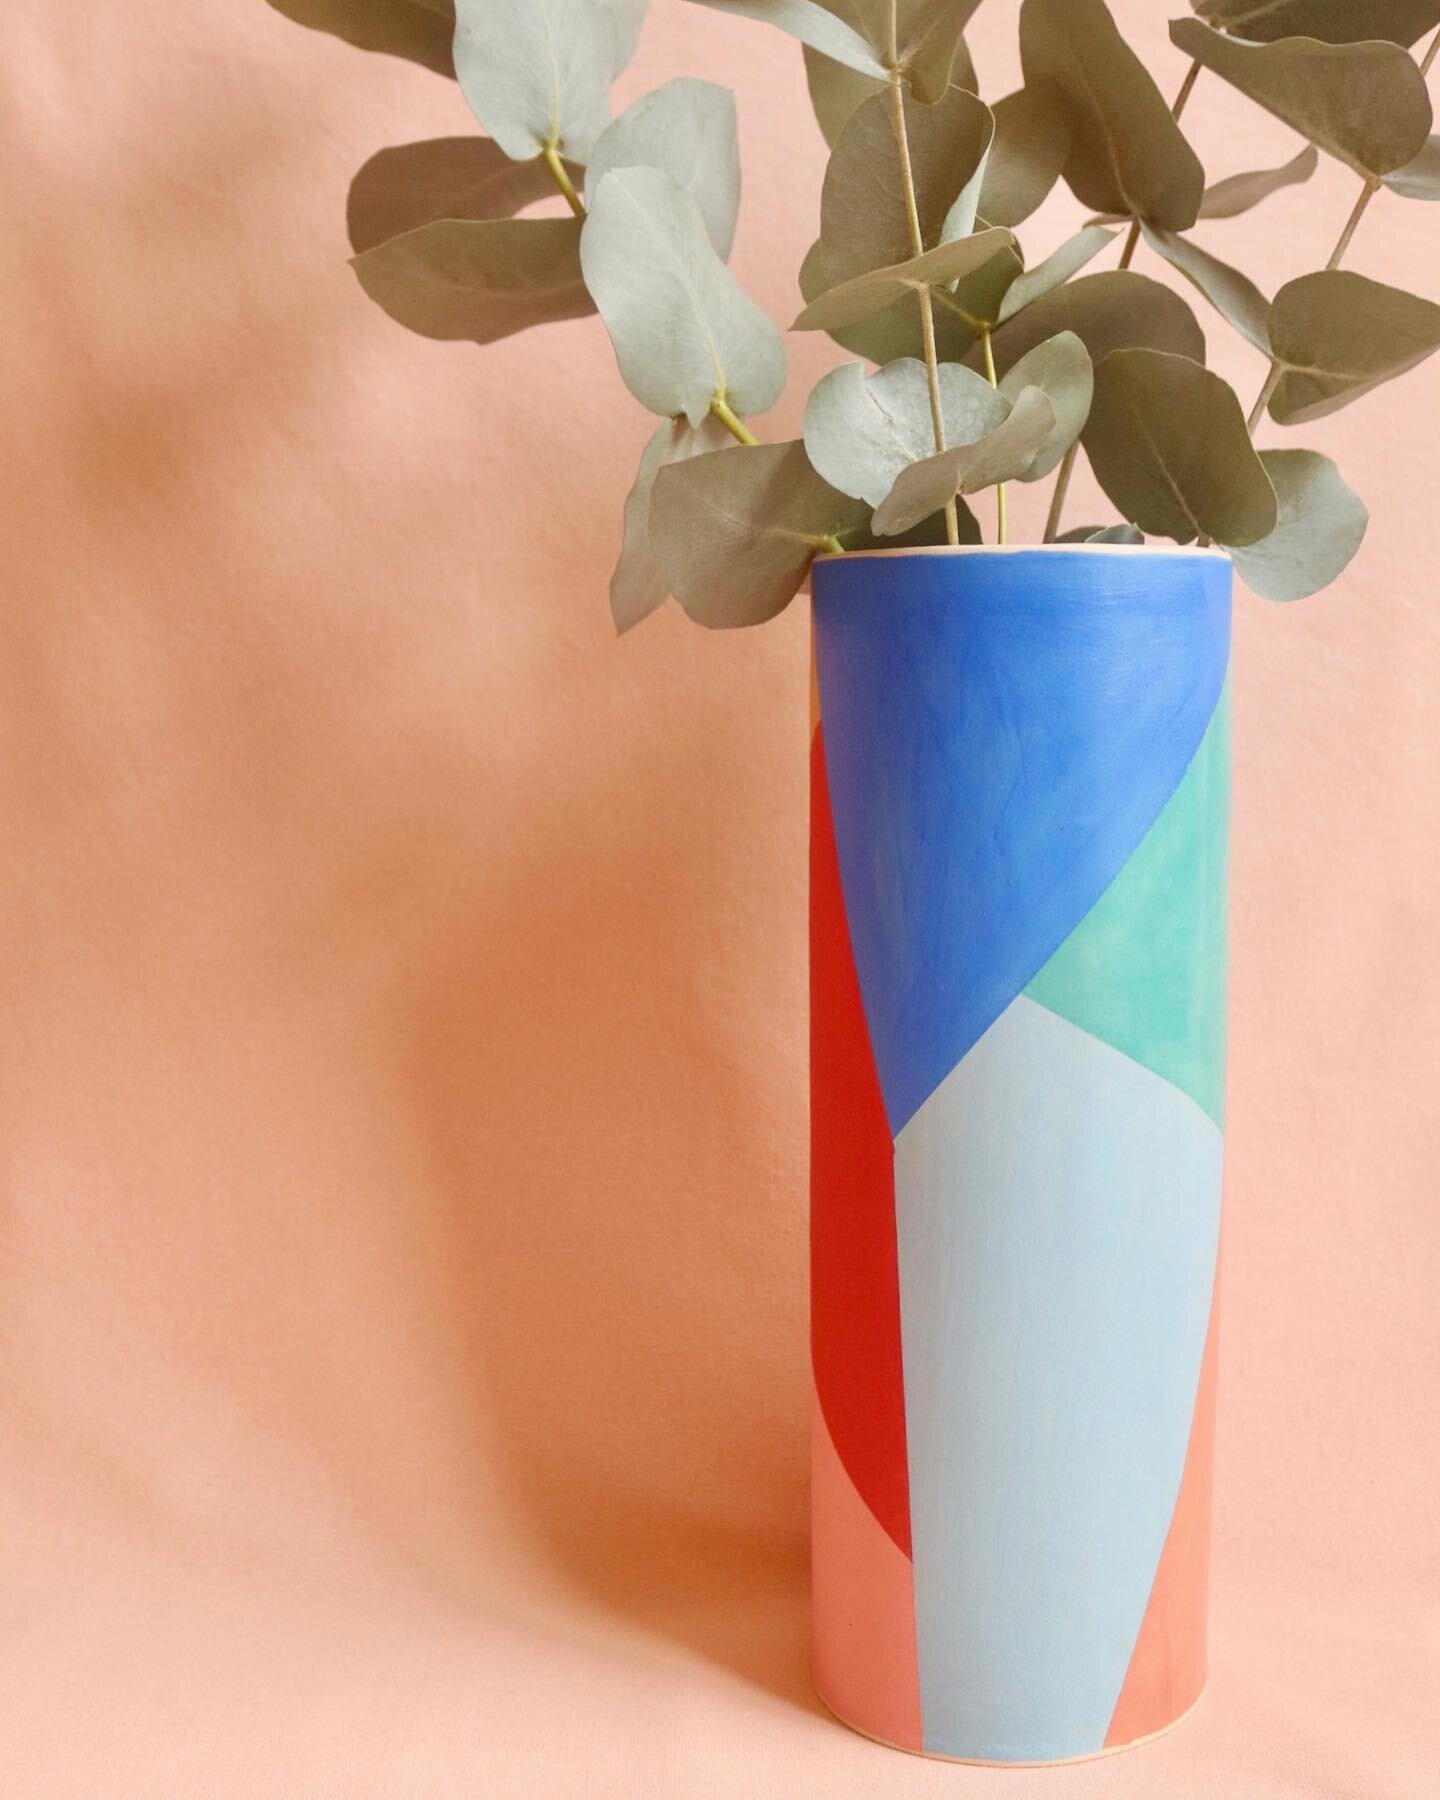 This was a new piece I created this year, using a previous vase form, but incorporating my incredibly popular Rainbow pattern onto it. 

The vase appears different from various angles, as the colours change as you rotate it round. The vase is left in